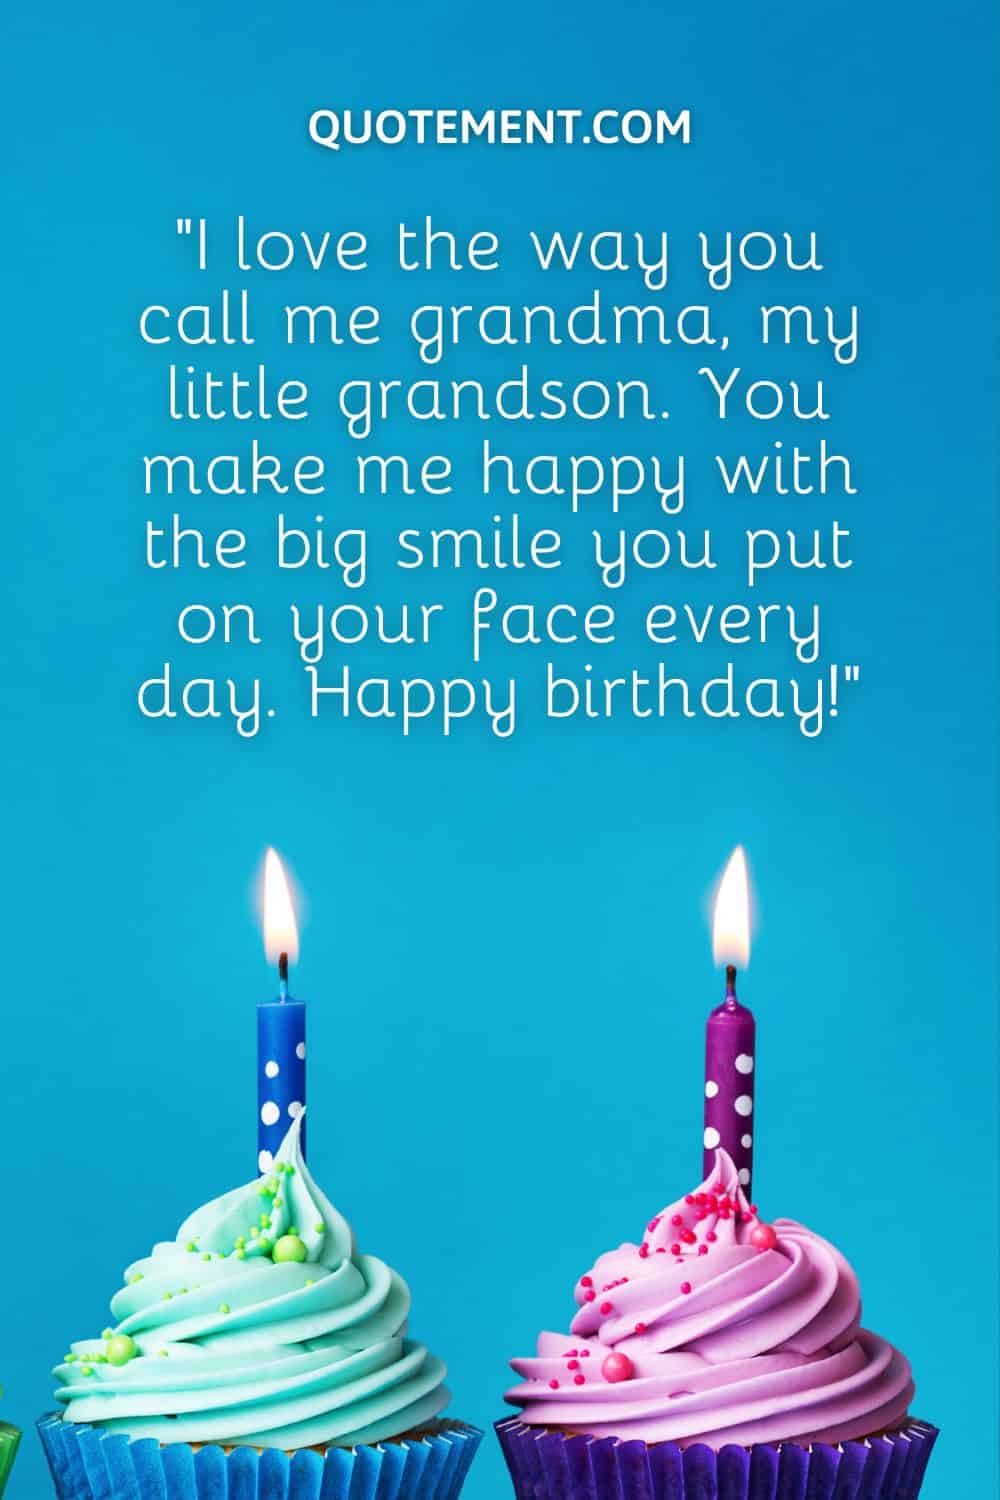 “I love the way you call me grandma, my little grandson. You make me happy with the big smile you put on your face every day. Happy birthday!”